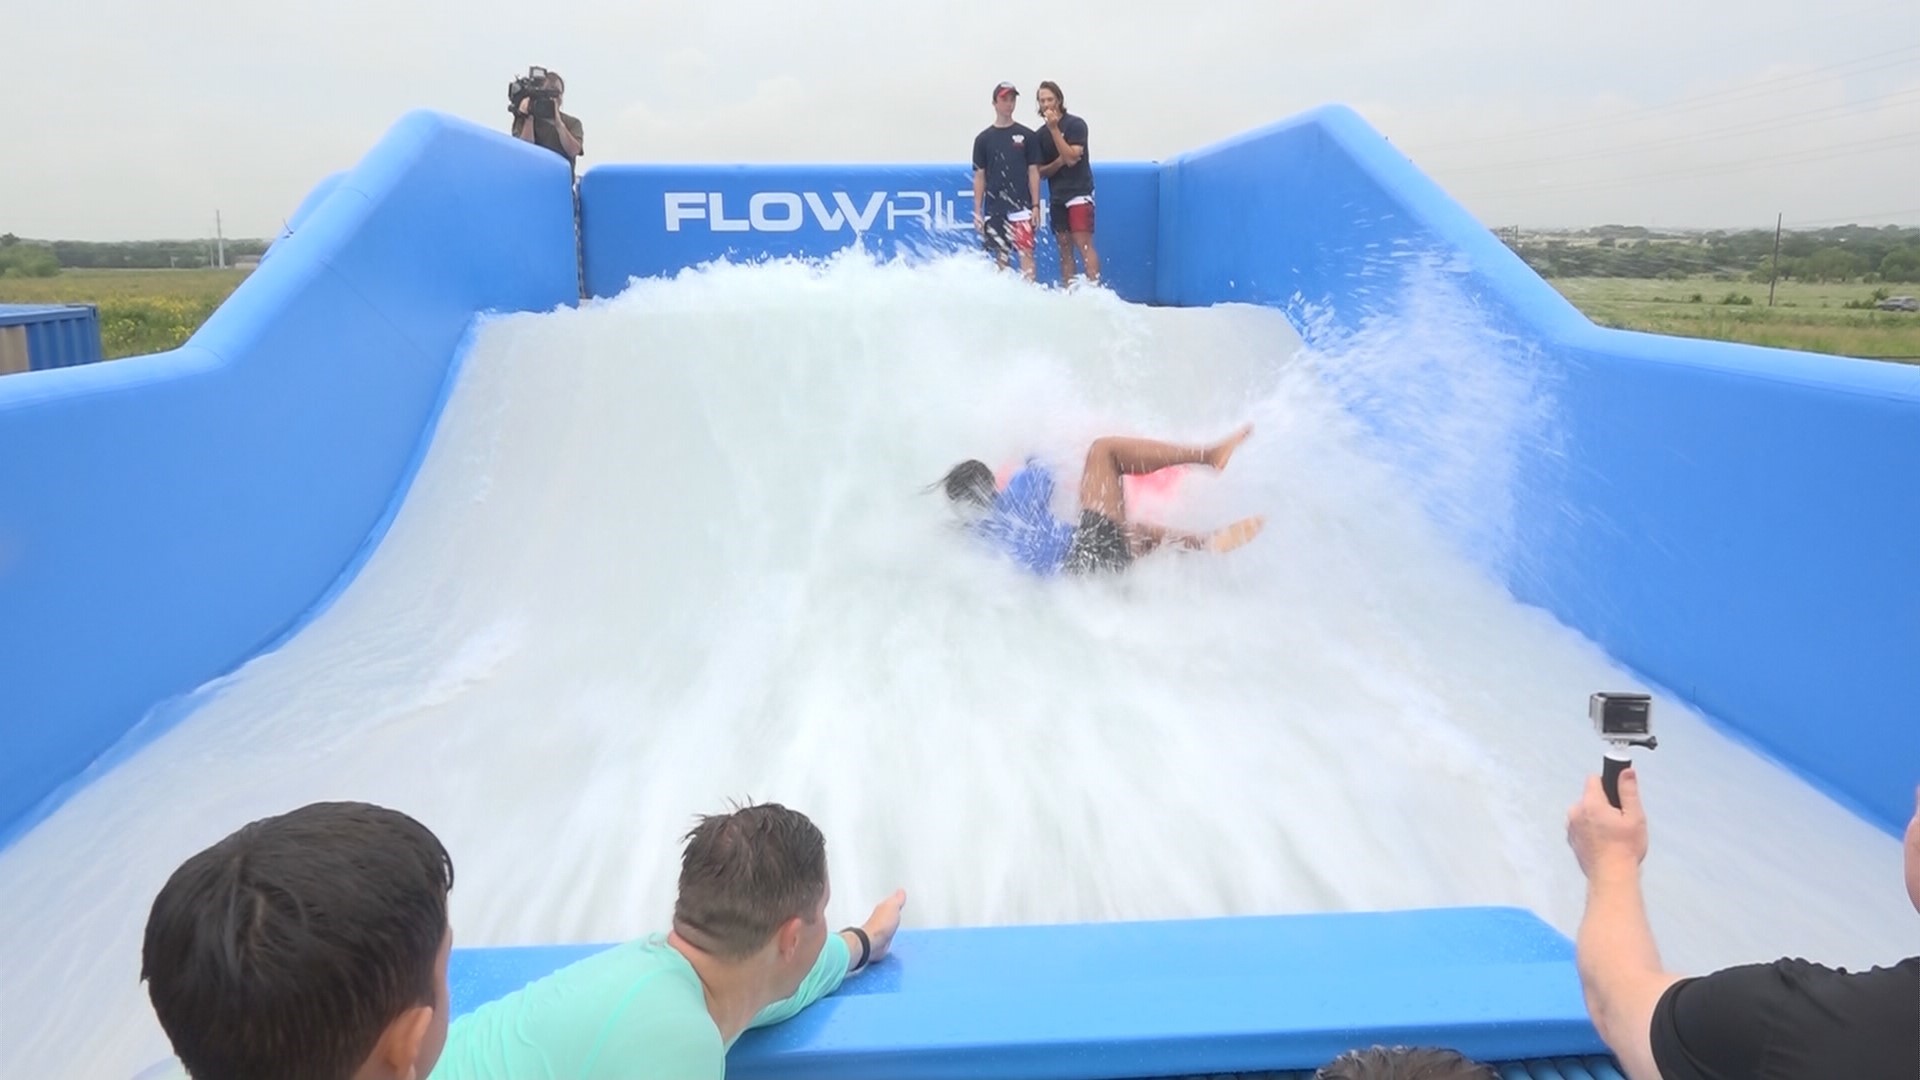 Team Daybreak took a few spills while tackling the new PFlowrider surf simulator.